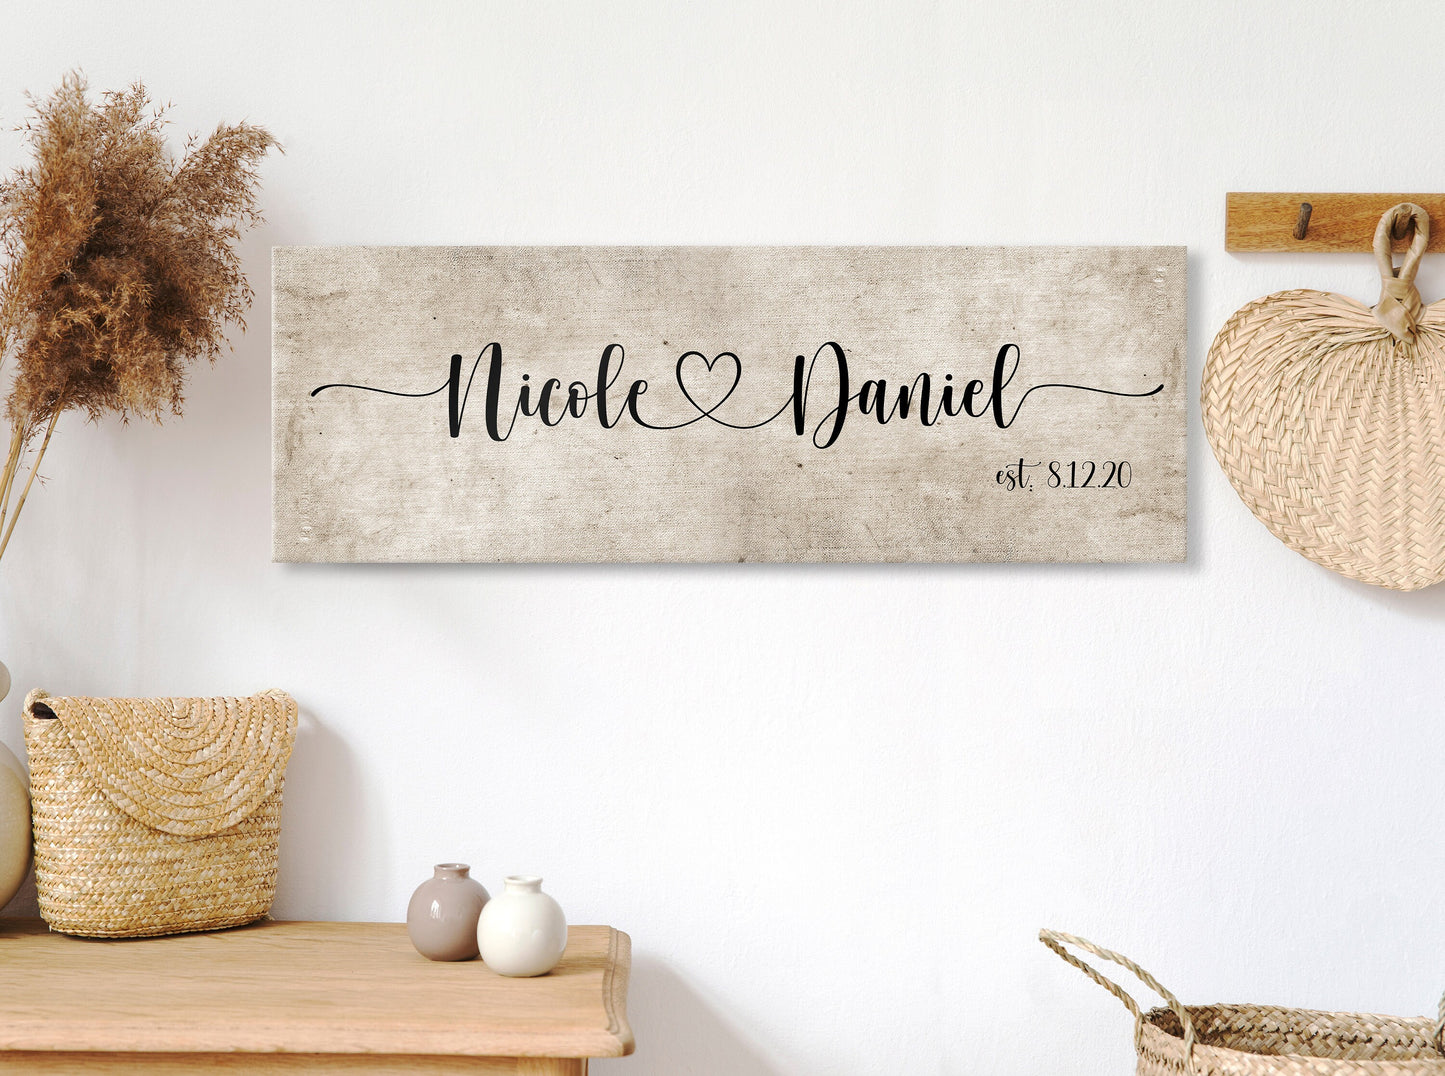 Wedding Song 3 Piece Canvas Set With Names Second Anniversary Gift